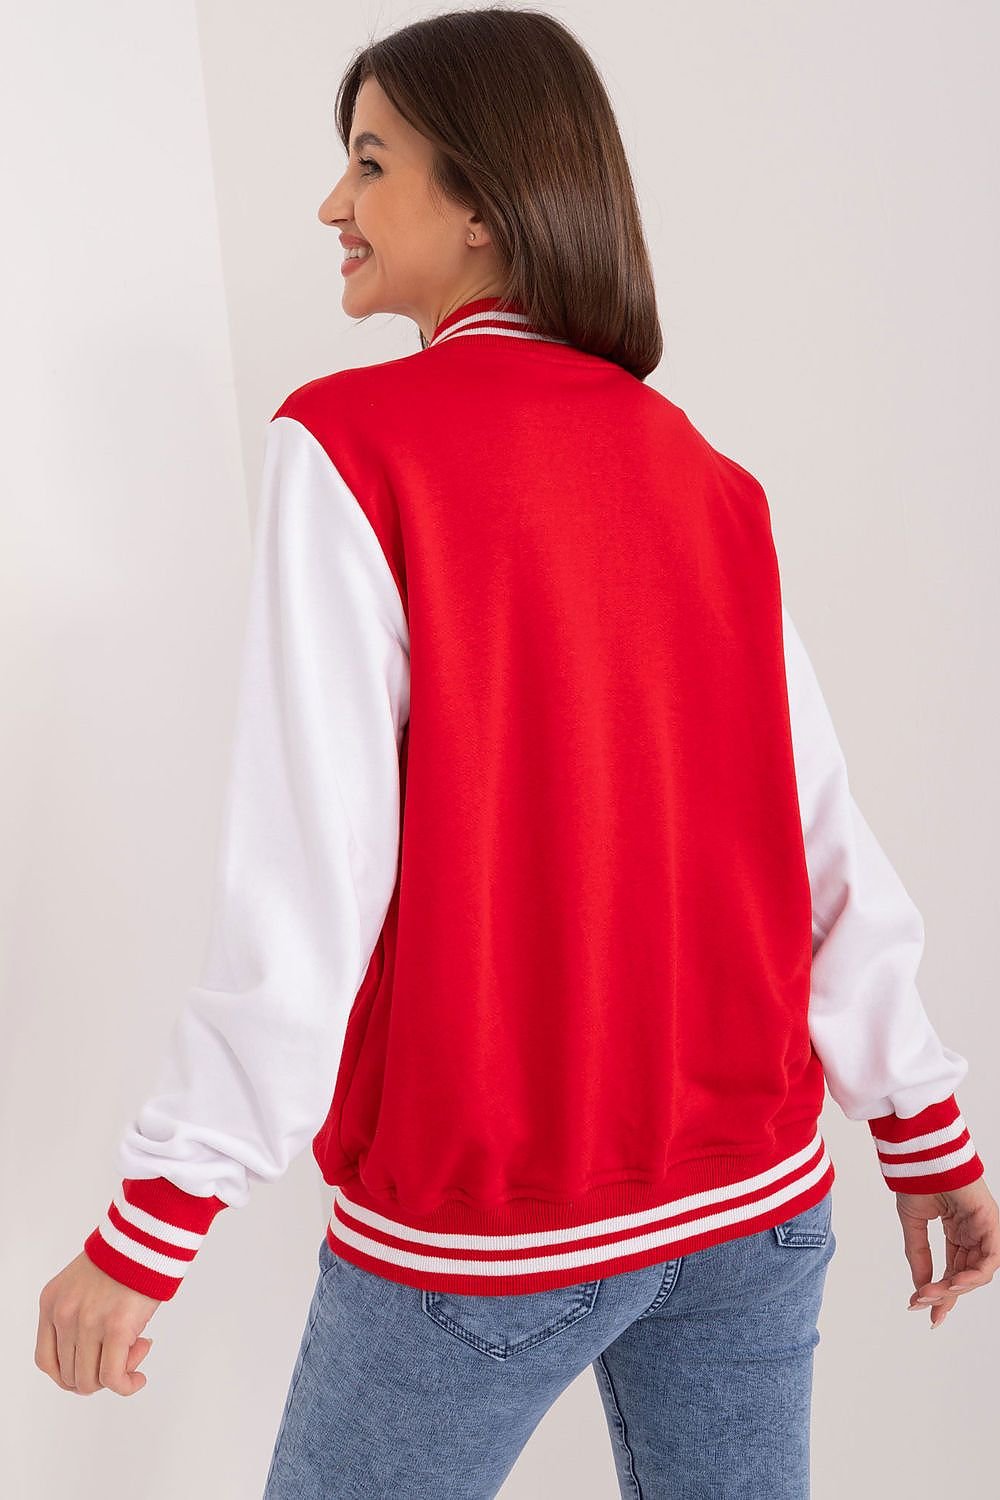 Red Sporty Style Jacket